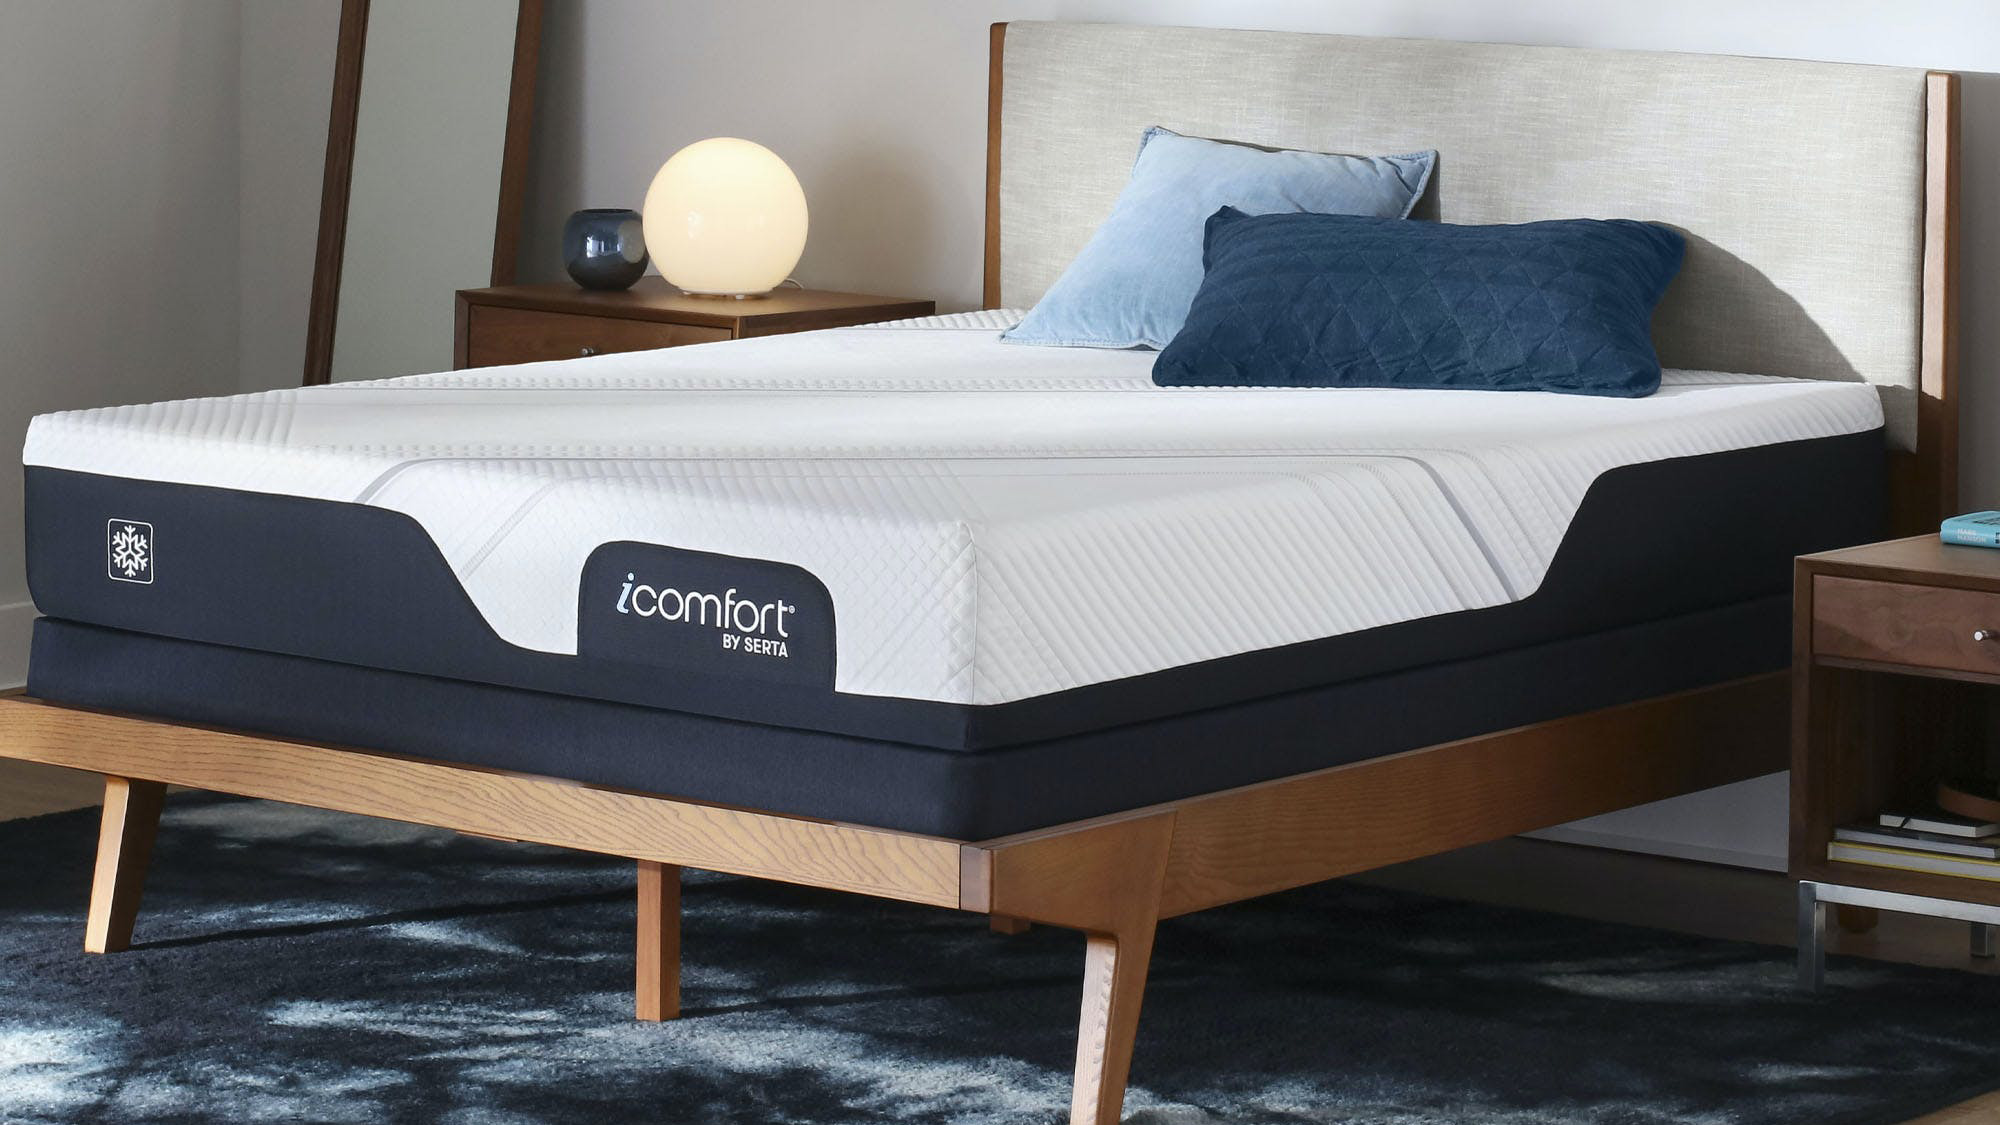 The Serta iComfort Mattress on a wooden bed frame and dressed with two blue pillows